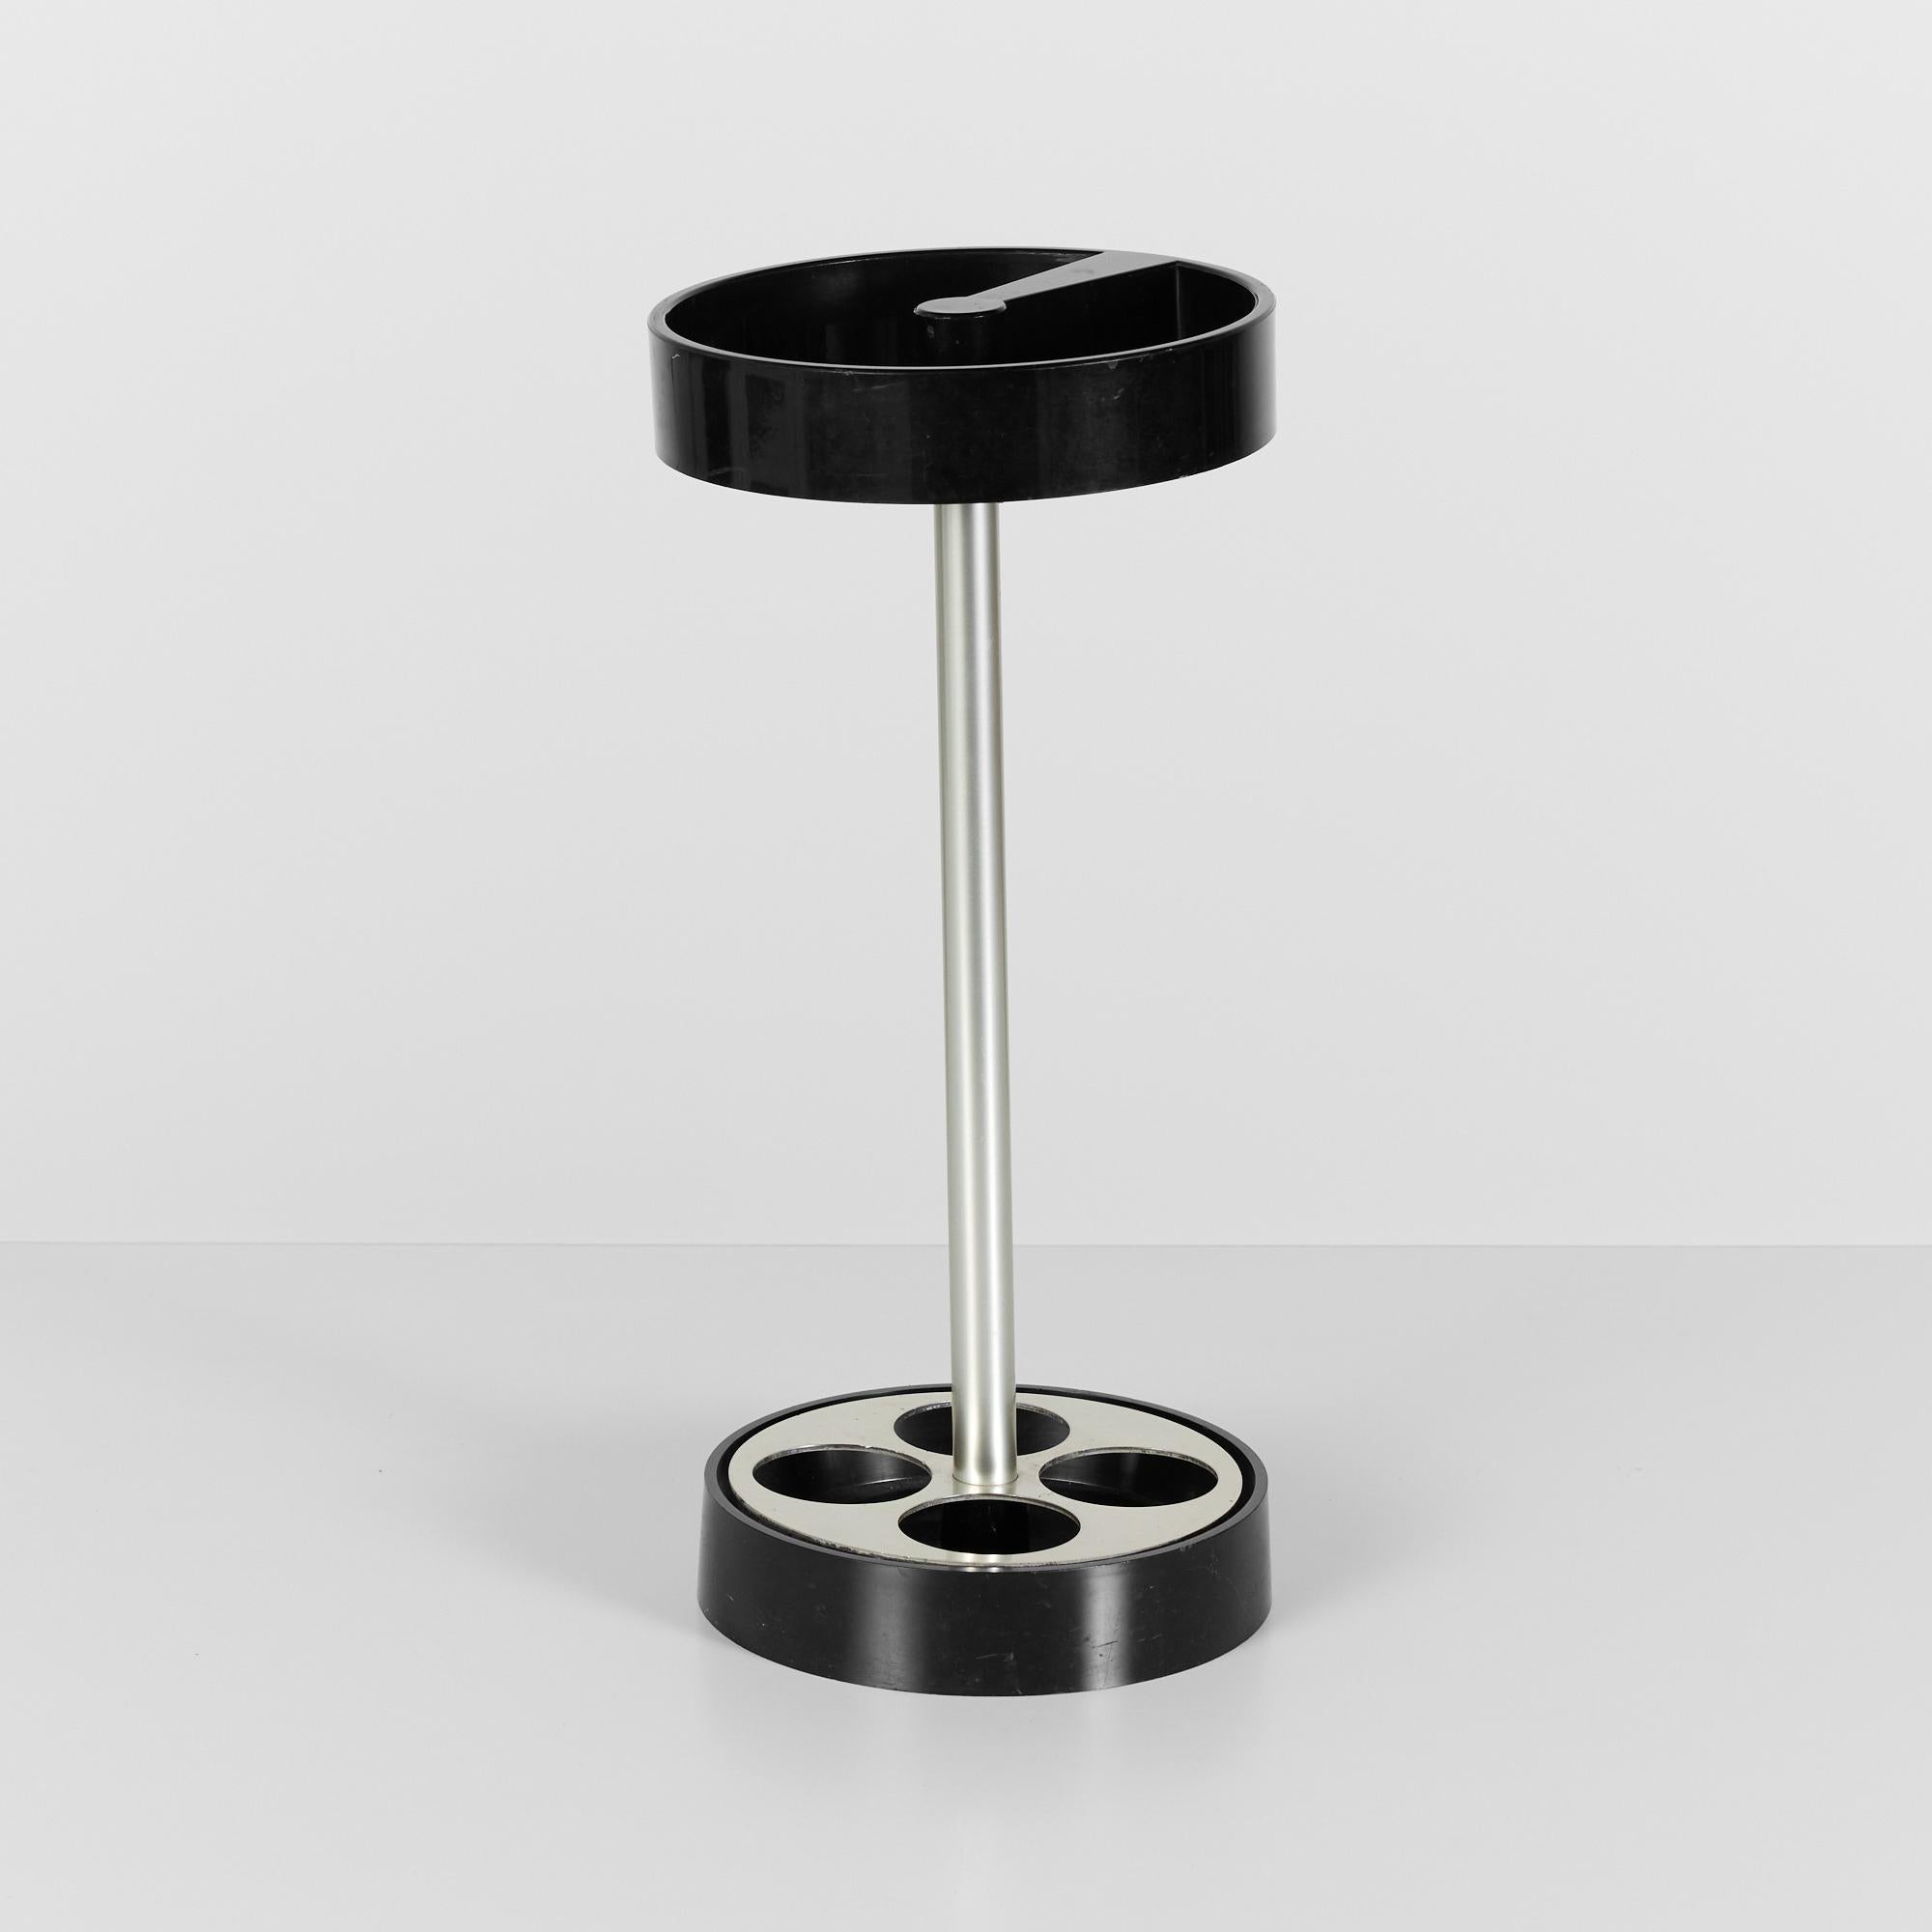 Free standing simplistic barbell design of brushed aluminum and black plastic make up this umbrella stand from Italian design house Kartell. This stand features a circular pedestal base with round aluminum cutouts to hold up to four umbrellas. The